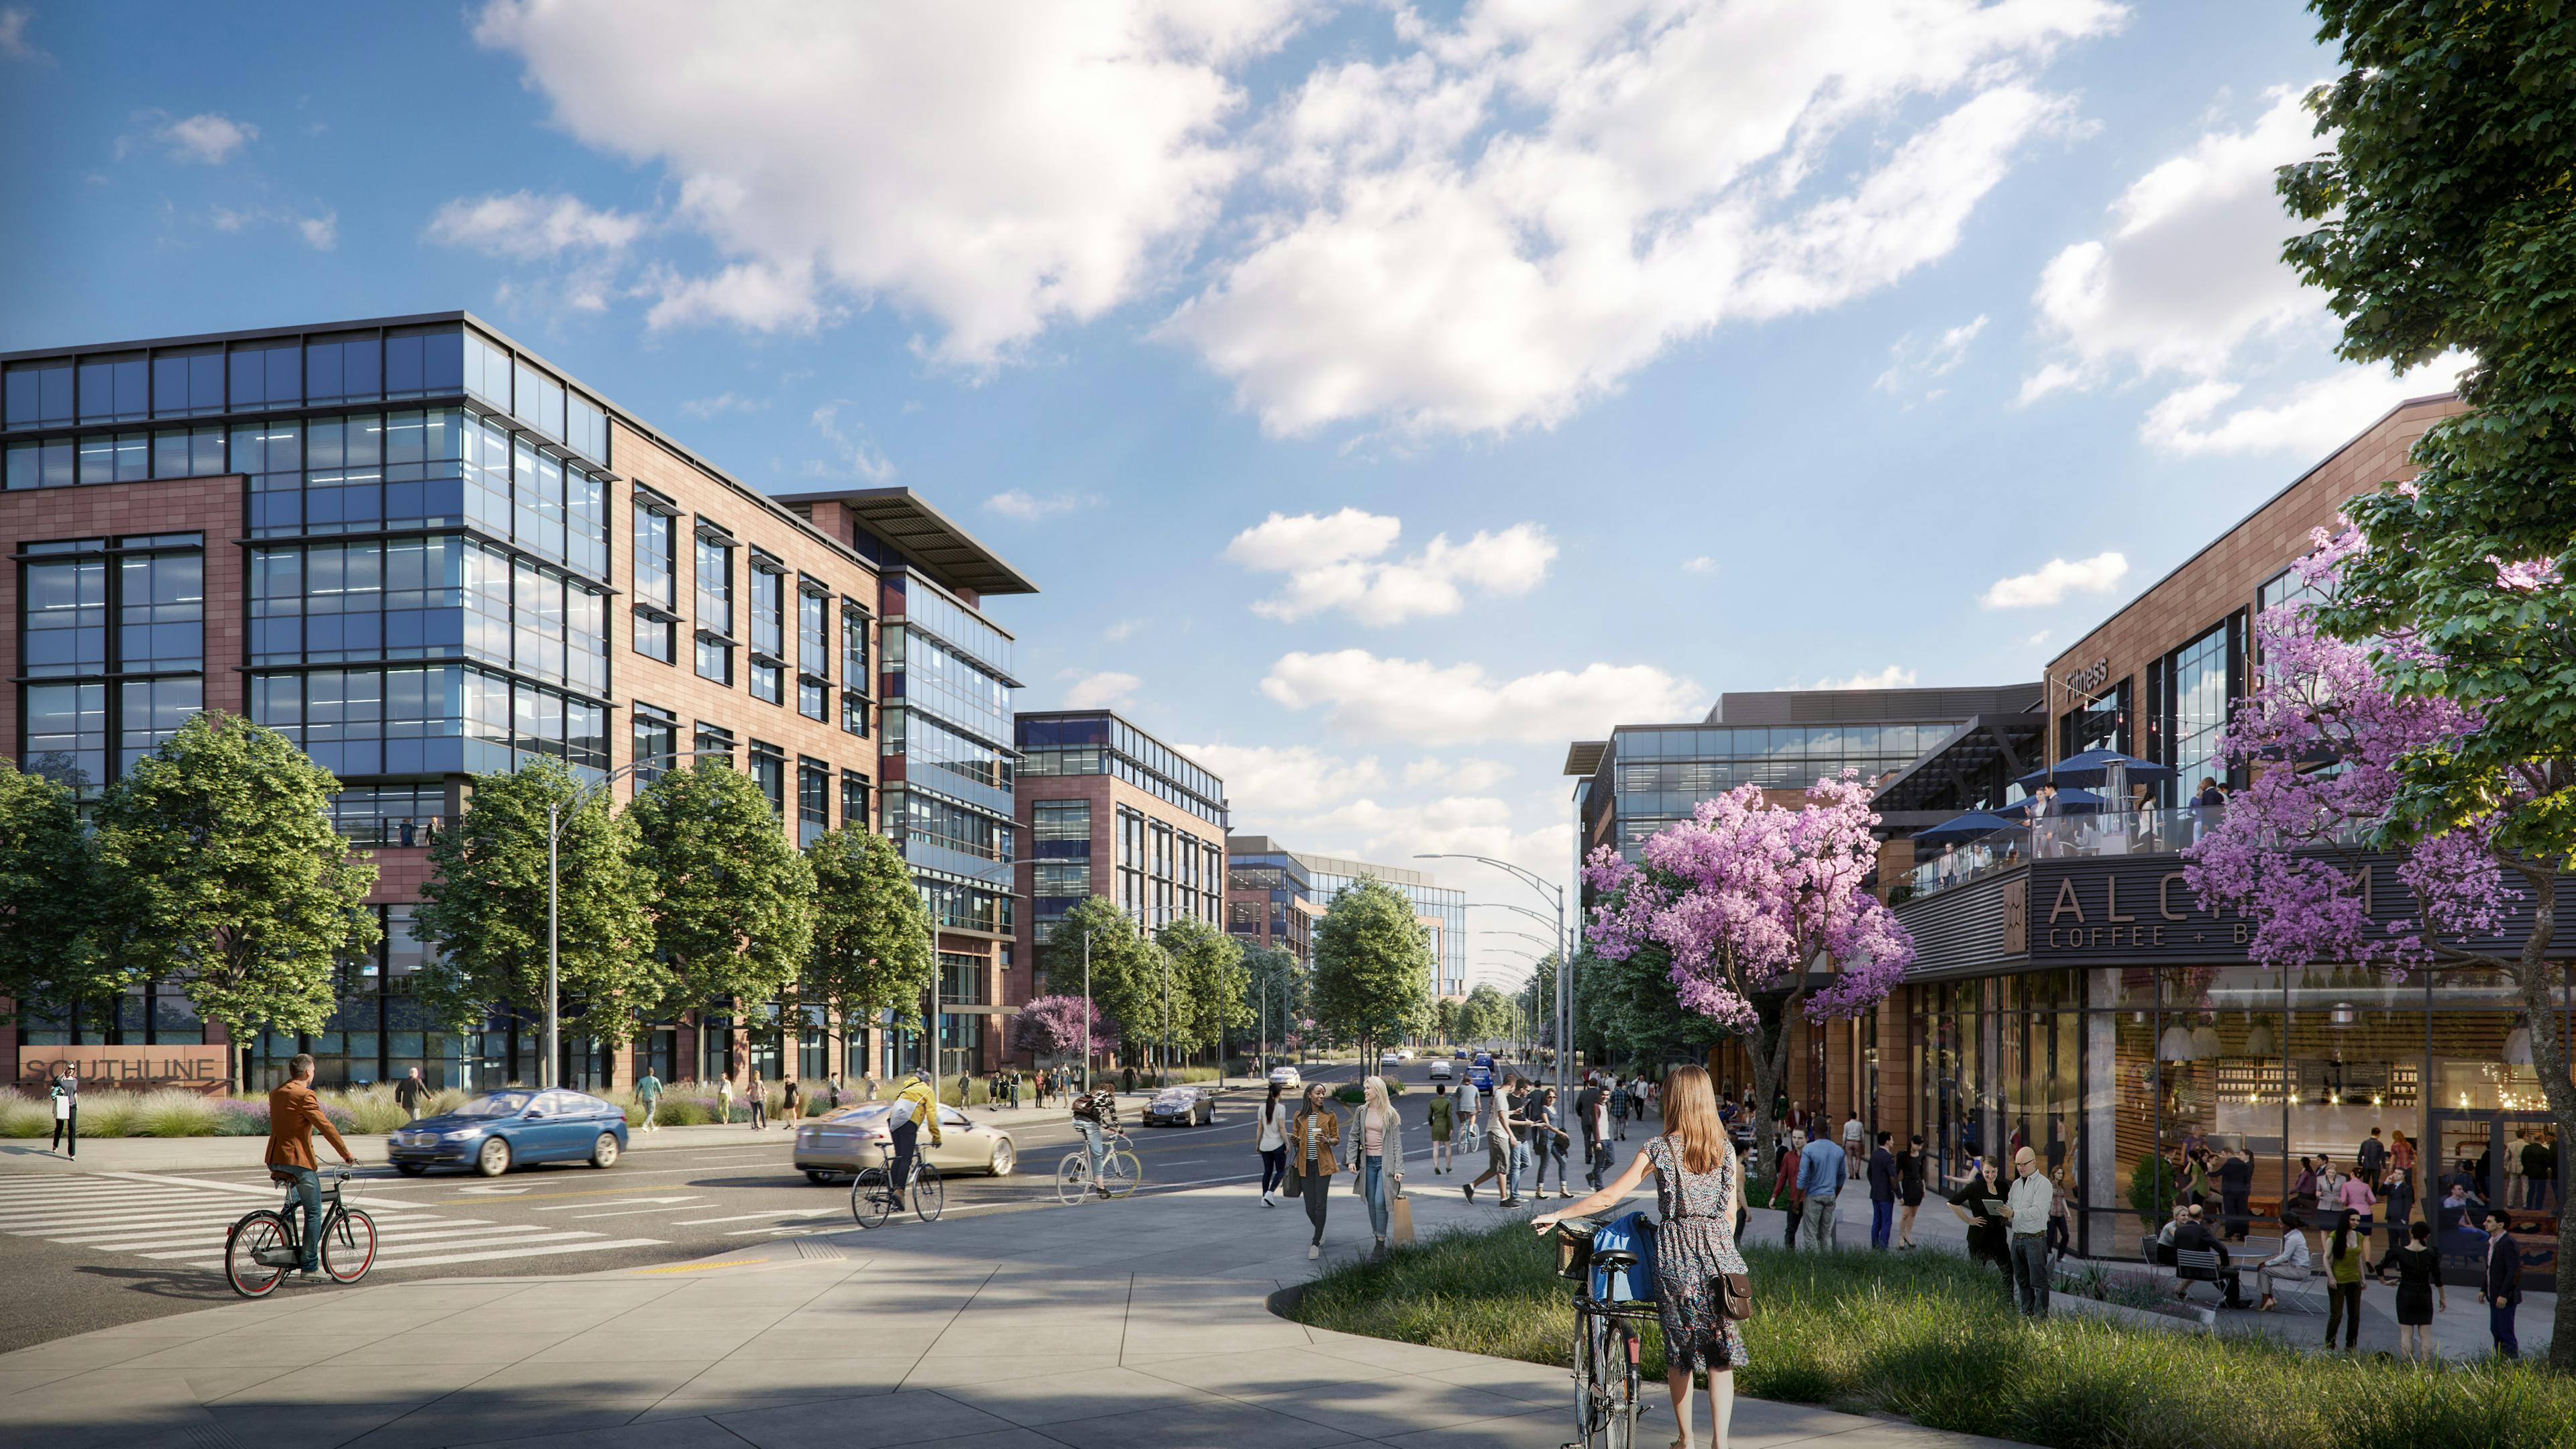 3d render of project SOUTHLINE during daytime with pedestrians